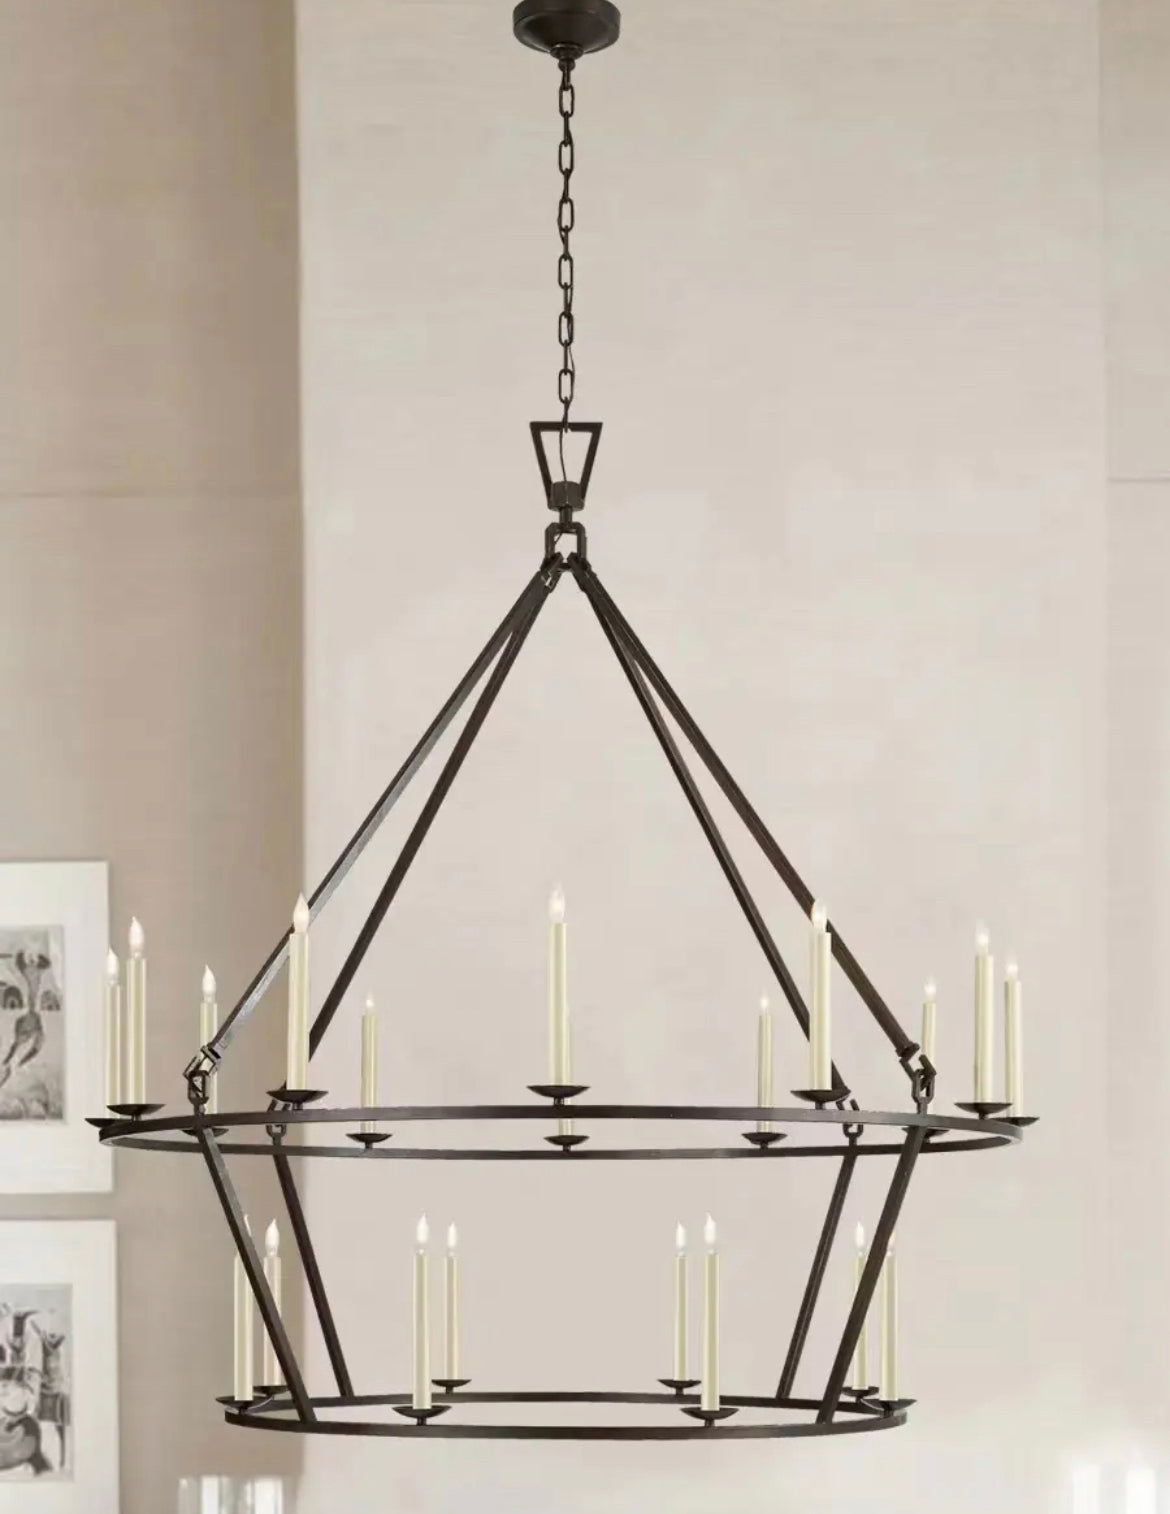 Chandelier American Retro Industrial Style Candle Chandelier Wrought Iron Circle Lights